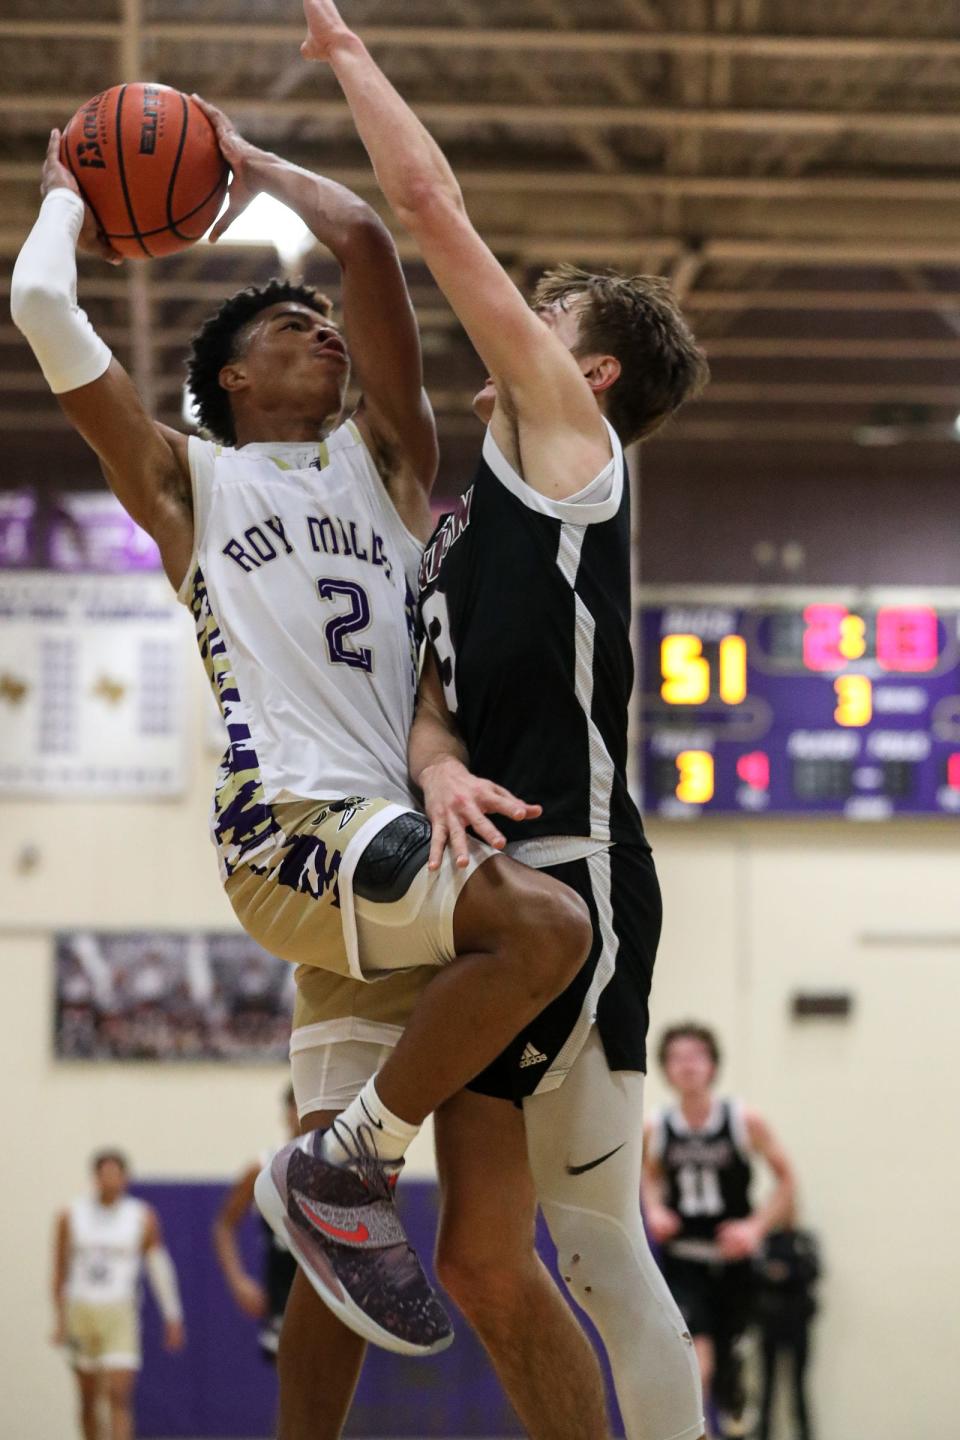 Londons Preston Cazalas attempts to block a basket by Miller's Damare Lister during the game at Miller High School on Friday, Dec. 16, 2022, in Corpus Christi, Texas.